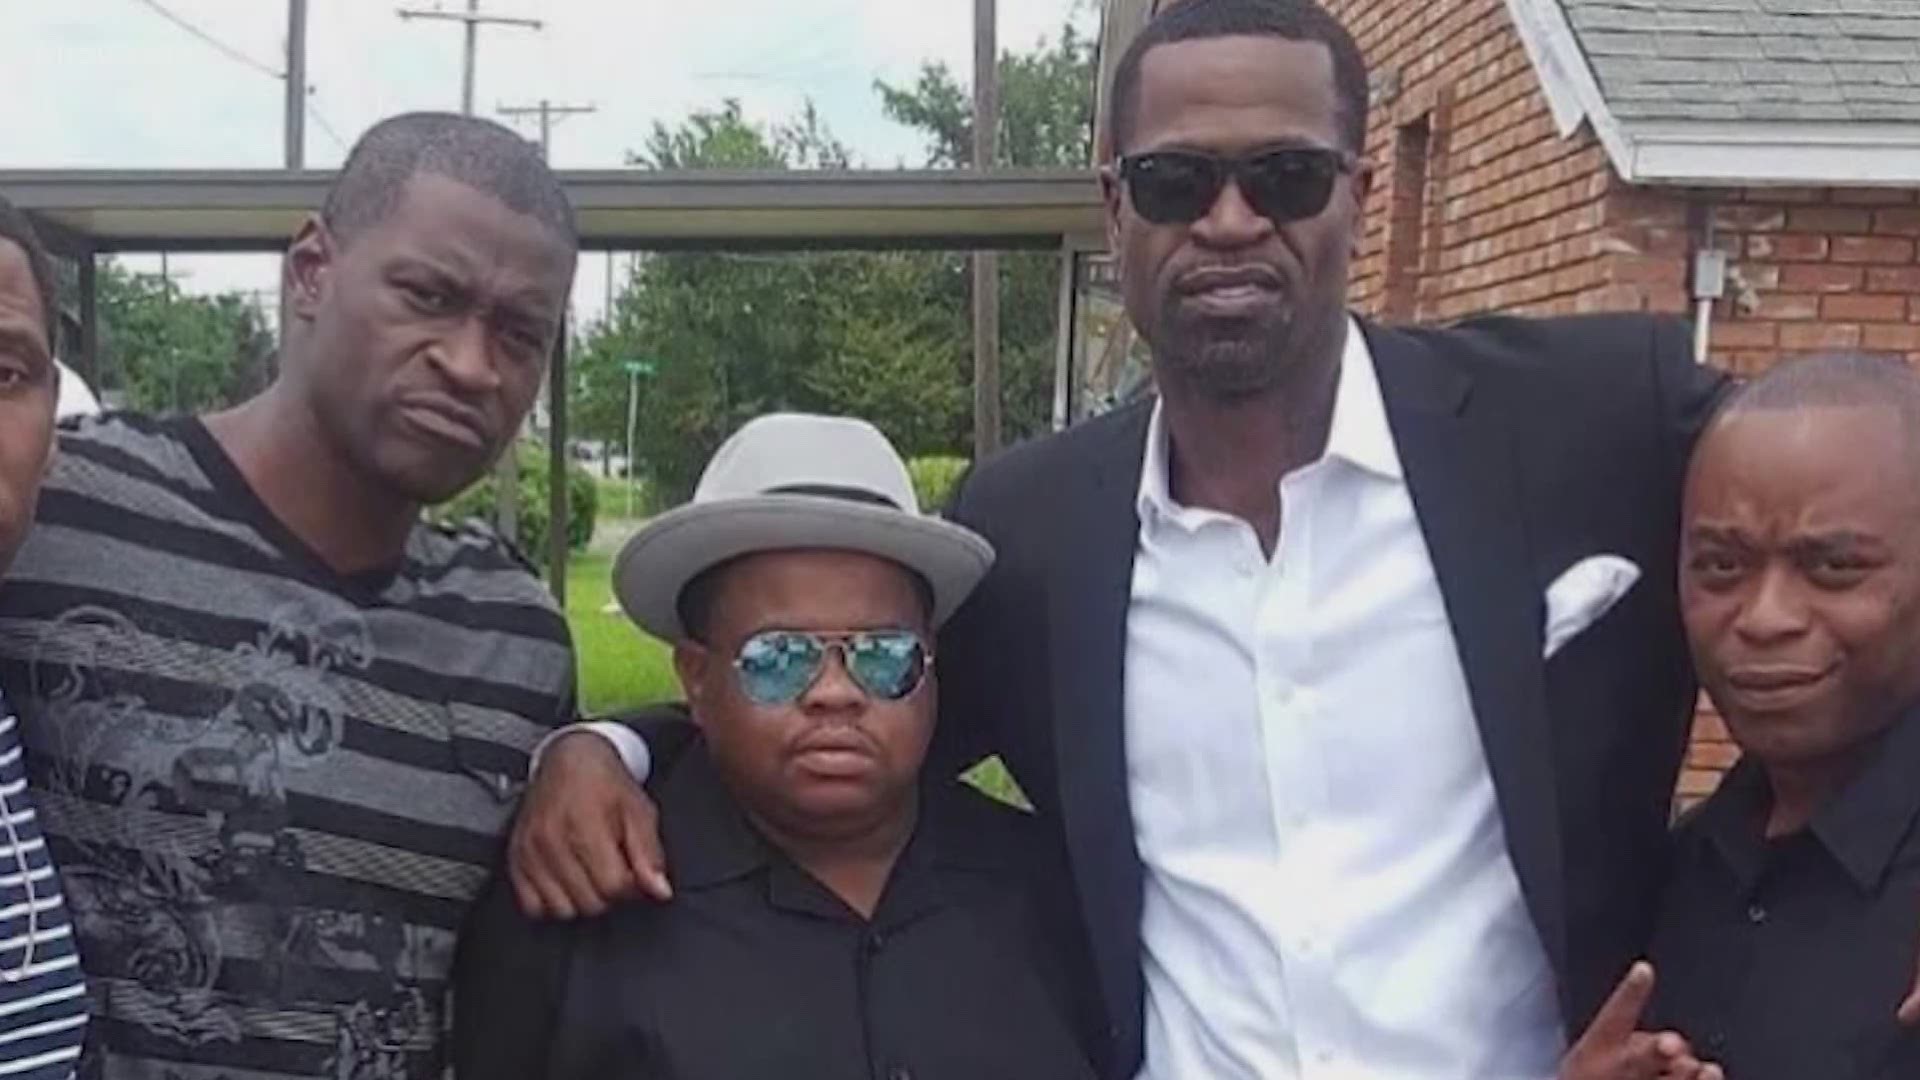 Former NBA player Stephen Jackson is speaking out about his "twin brother" George Floyd. His new mission in life is getting Justice for his twin.